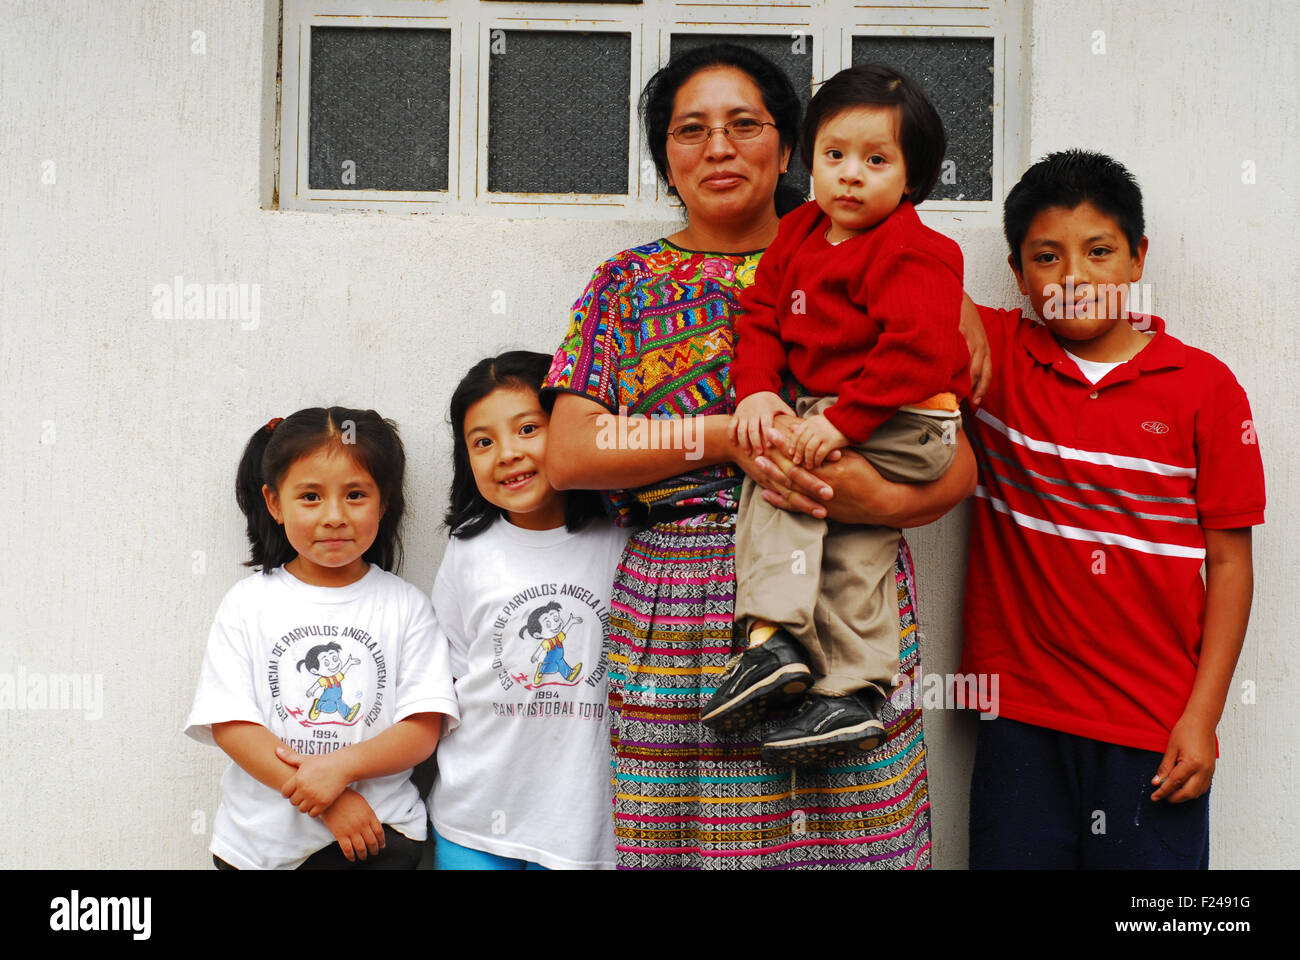 Guatemala, San Cristobal Totonicapan, mother and children in front of house ( Miguel Angel Xicay Vasquez 2 years, Faustina Vicenta vasquez Vasquez 34 years) Stock Photo